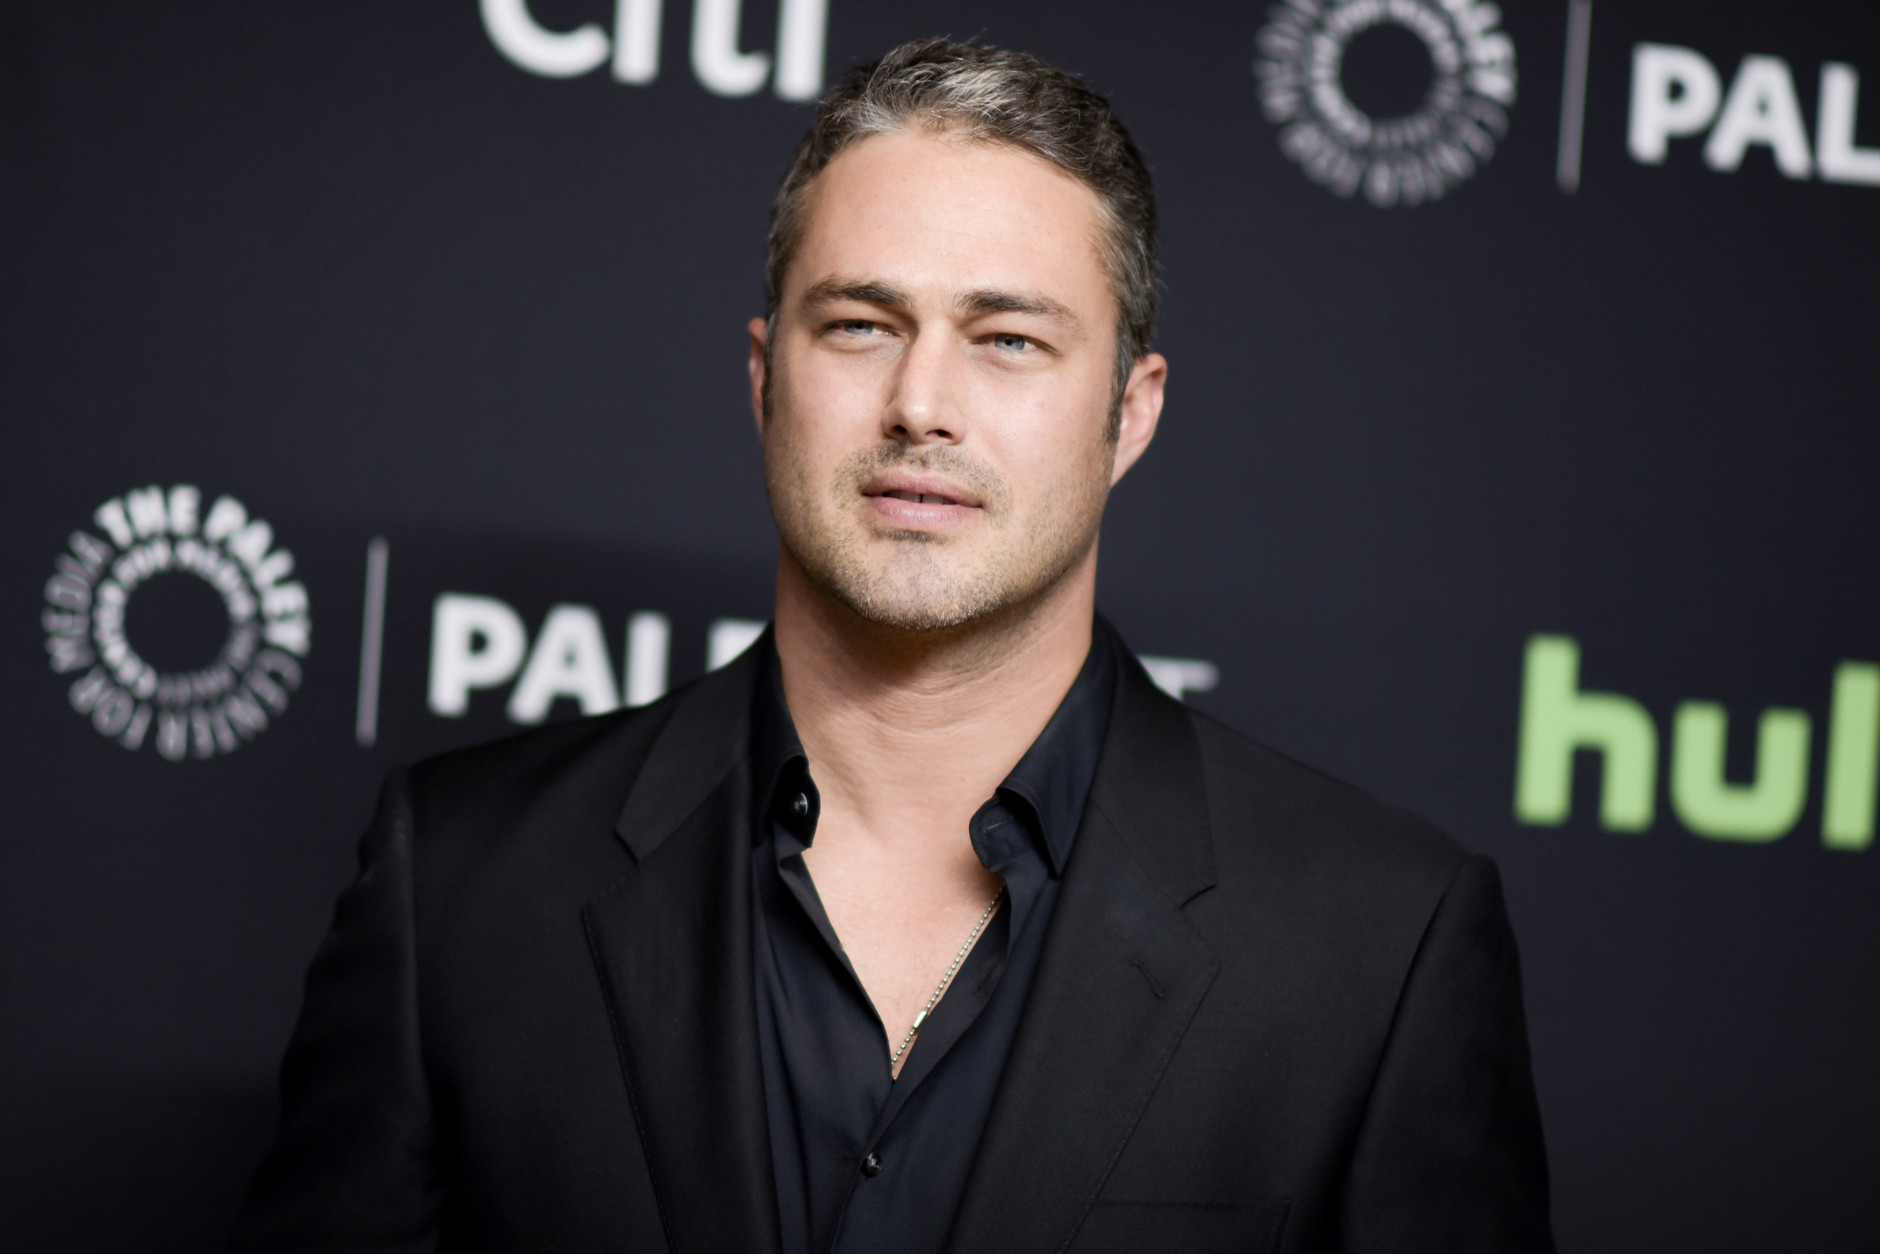 Taylor Kinney attends the 33rd Annual Paleyfest: "An Evening With Dick Wolf" held at the Dolby Theatre on Saturday, March 19, 2016, in Los Angeles. (Photo by Richard Shotwell/Invision/AP)